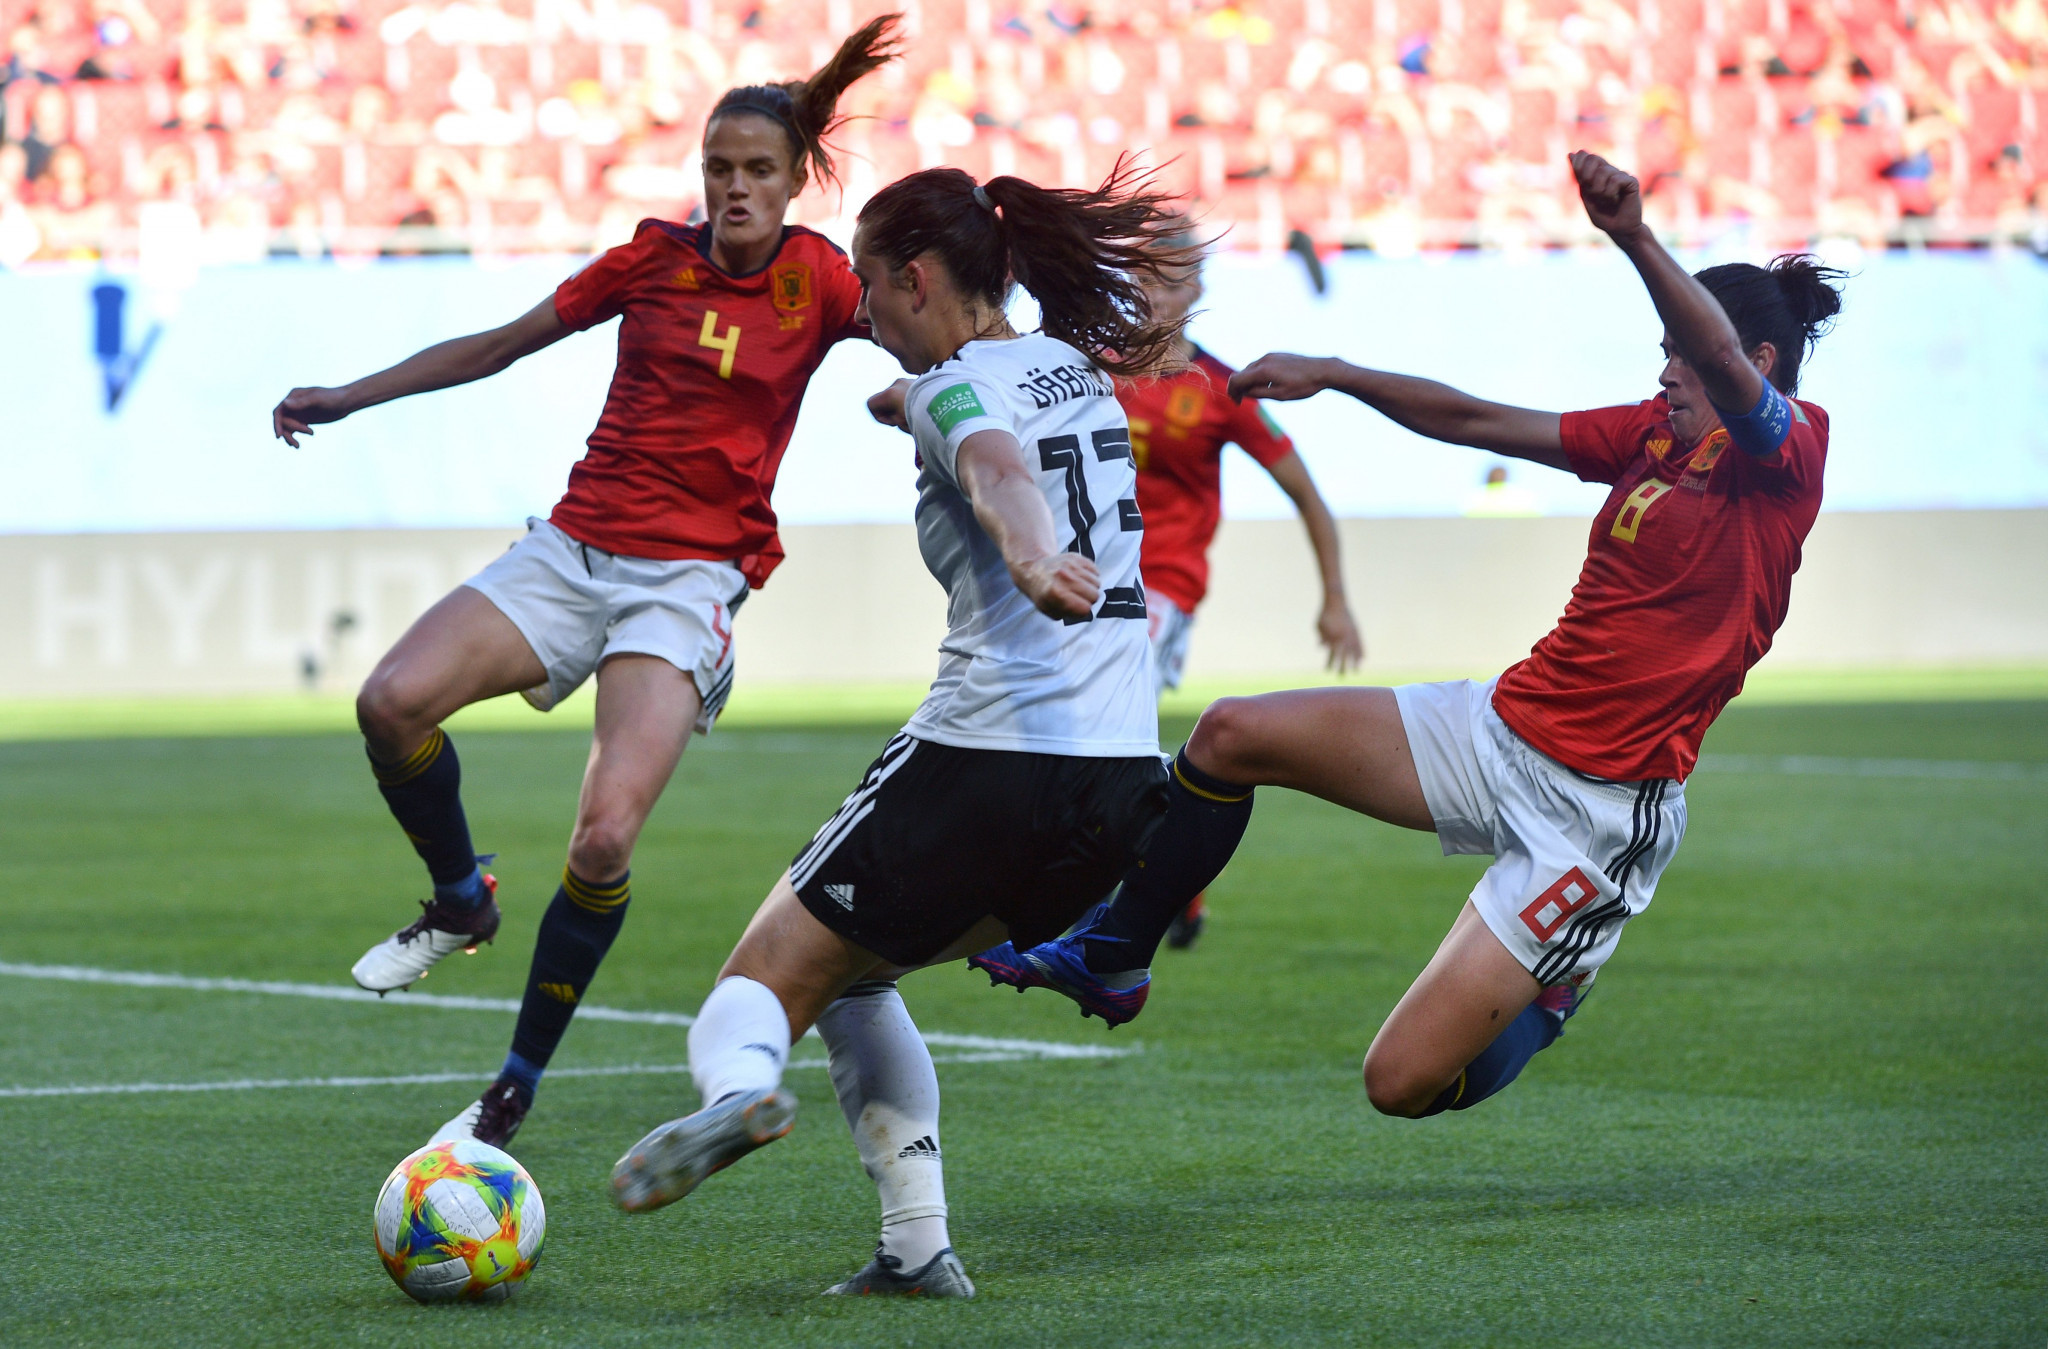 Germany's Sara Daebritz scored the solitary goal in her side's 1-0 win against Spain at the FIFA Women's World Cup ©Getty Images